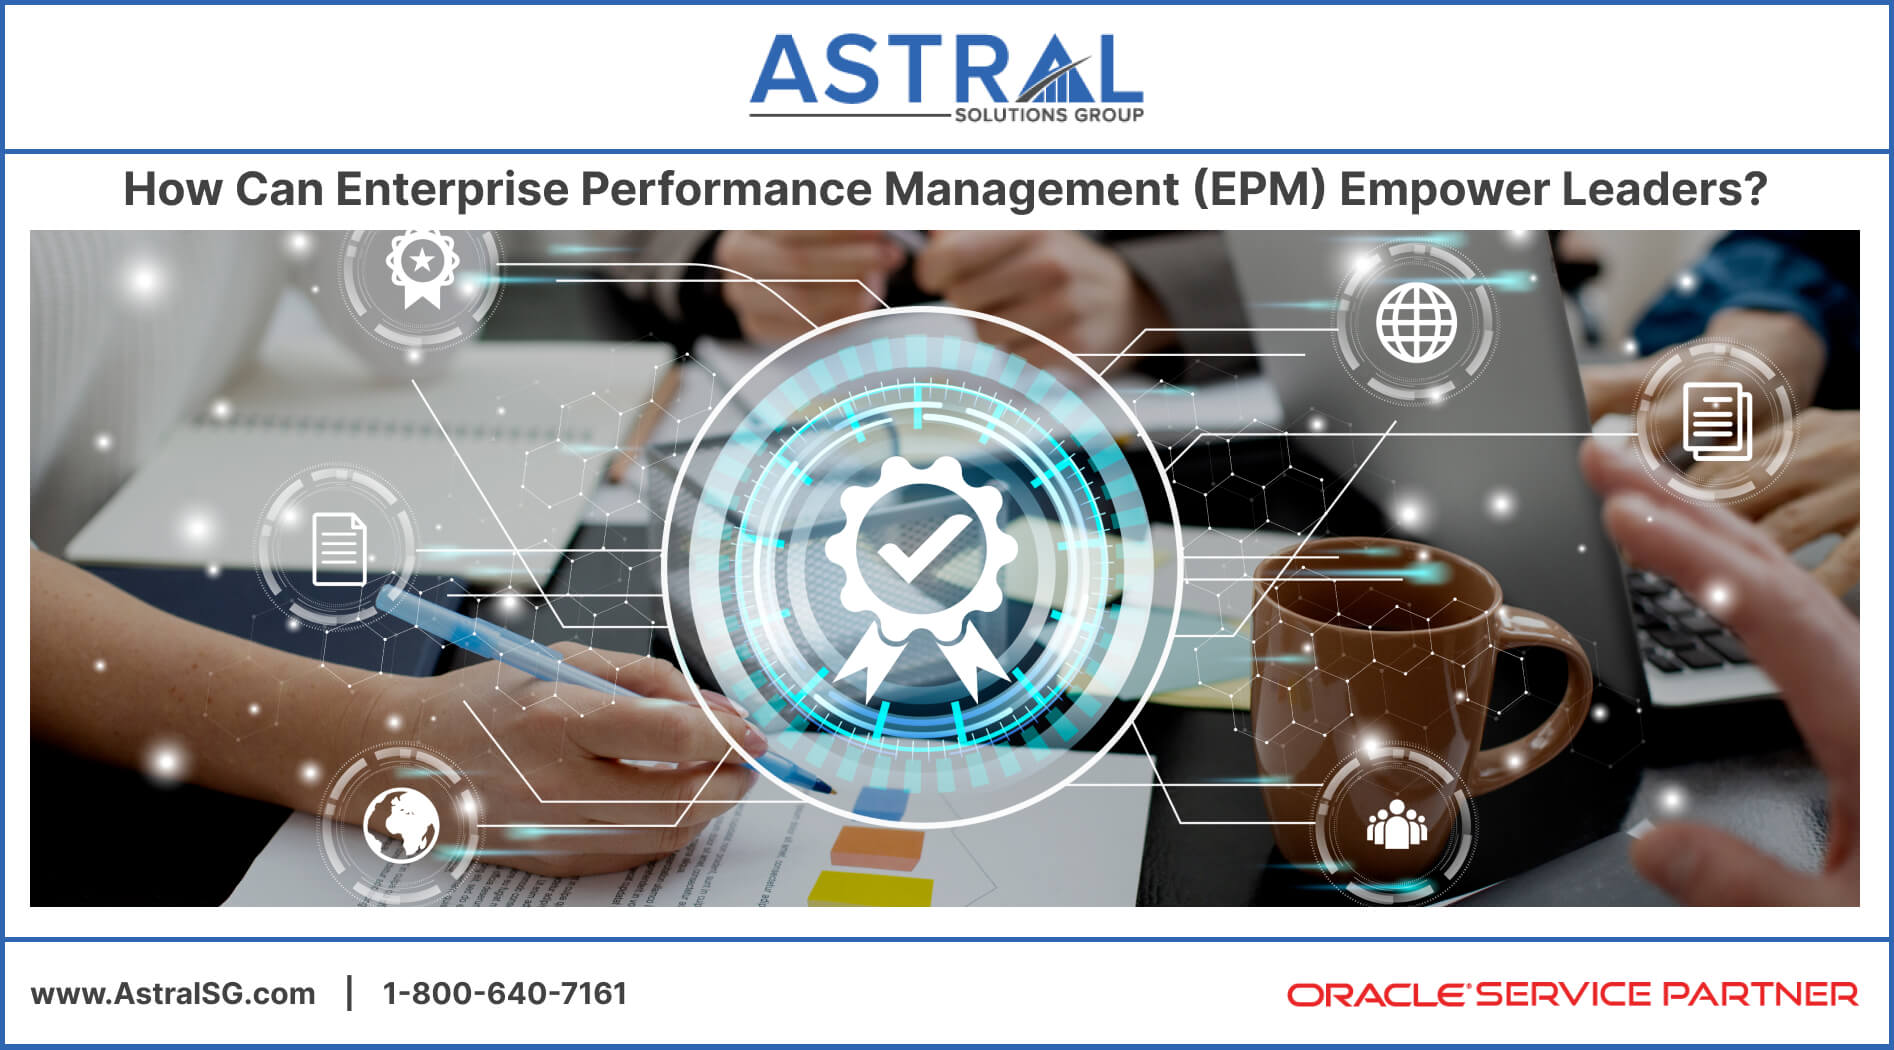 How Can Enterprise Performance Management (EPM) Empower Leaders?